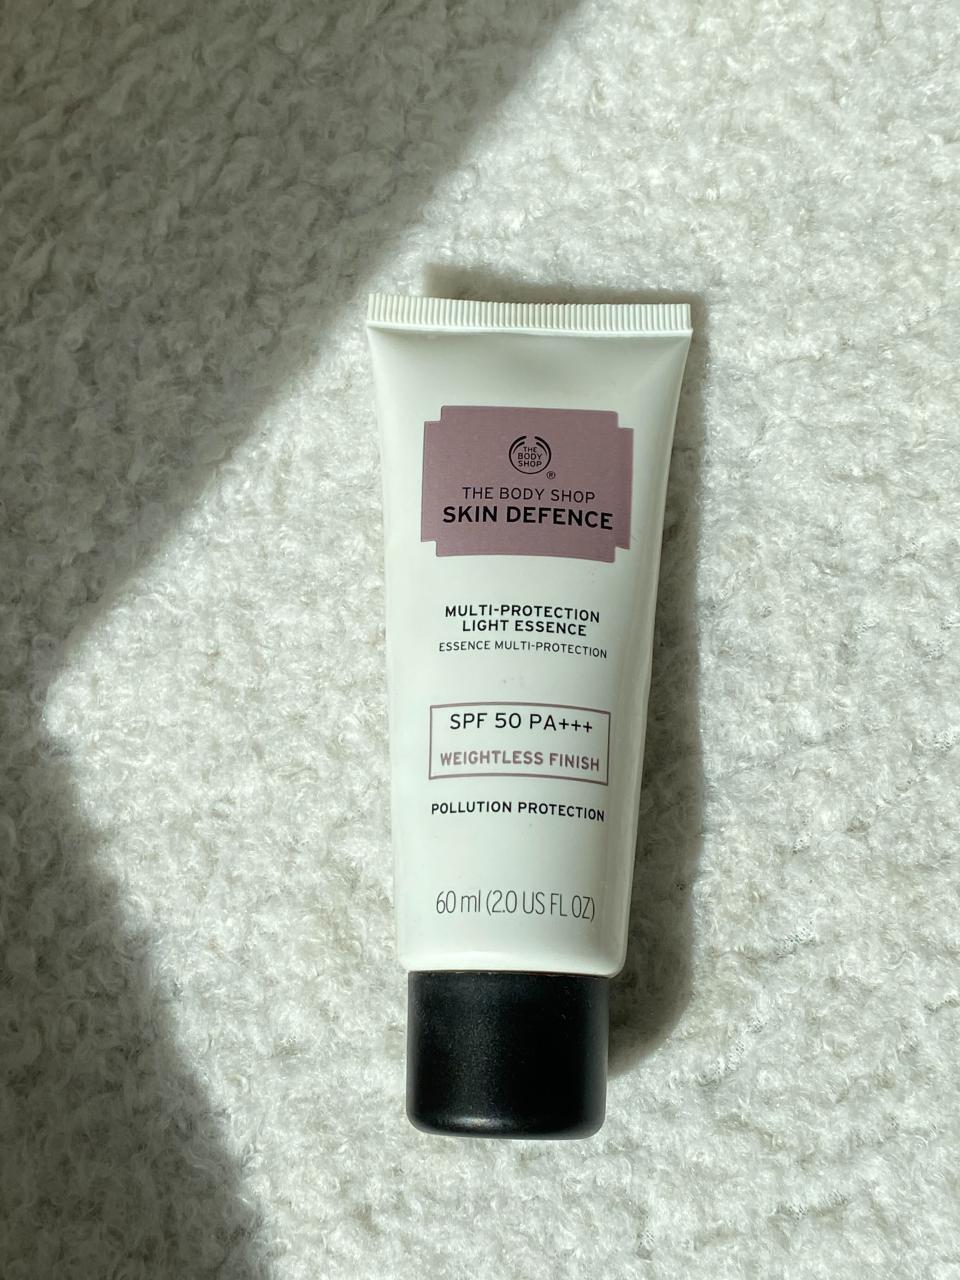 The Body Shop's Skin Defence SPF is back with a new look. If you're already a fan of the skincare essential you may be more familiar with the tube looking like this. (Yahoo Life UK)